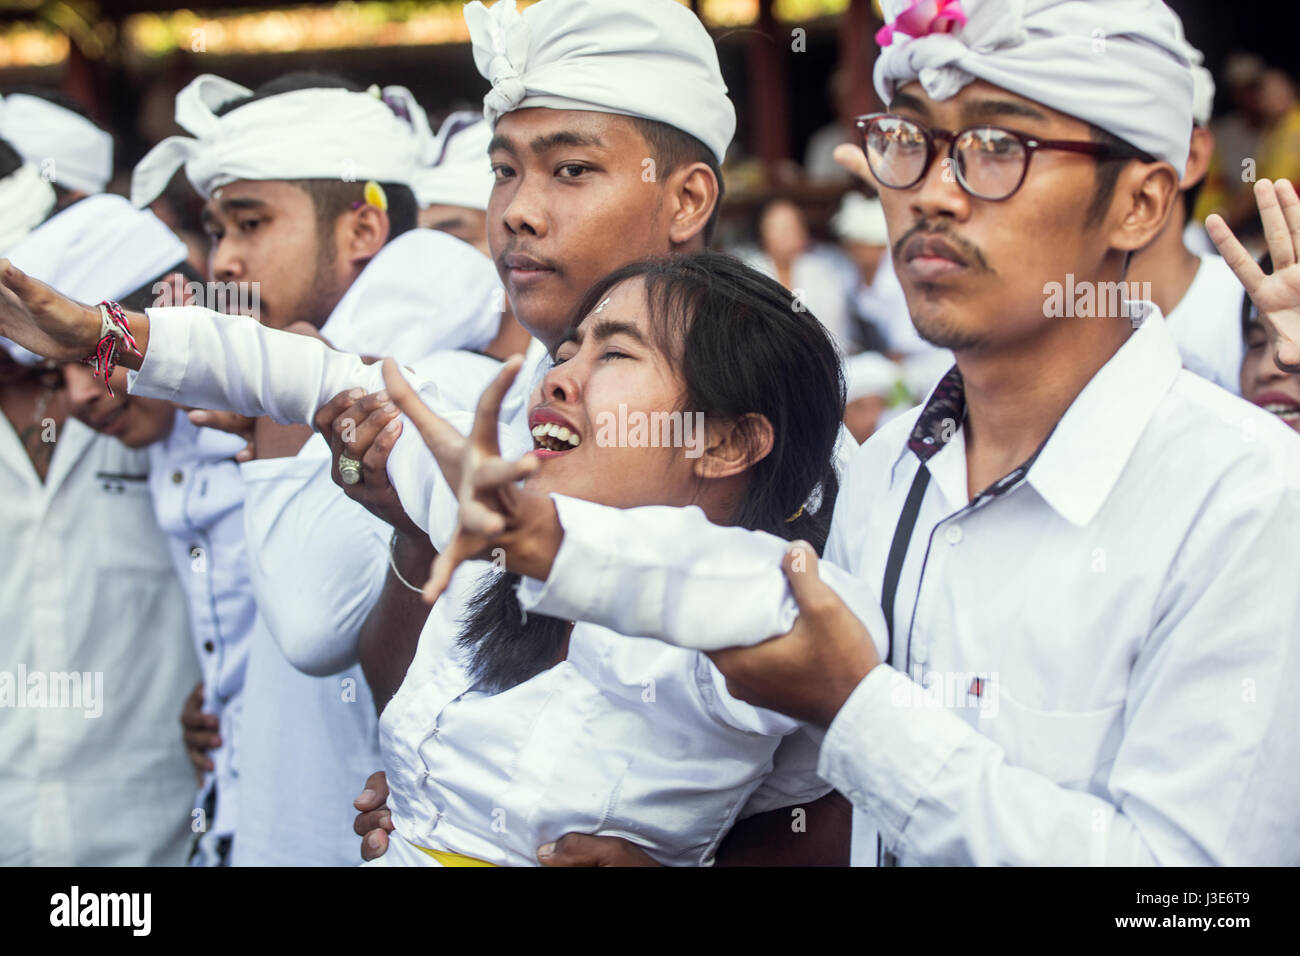 Religious woman in trance appears to be suffering at a Bali ceremony aided by devotees during the Sakral Ritual at the Hindu Pengerebongan ceremony Stock Photo